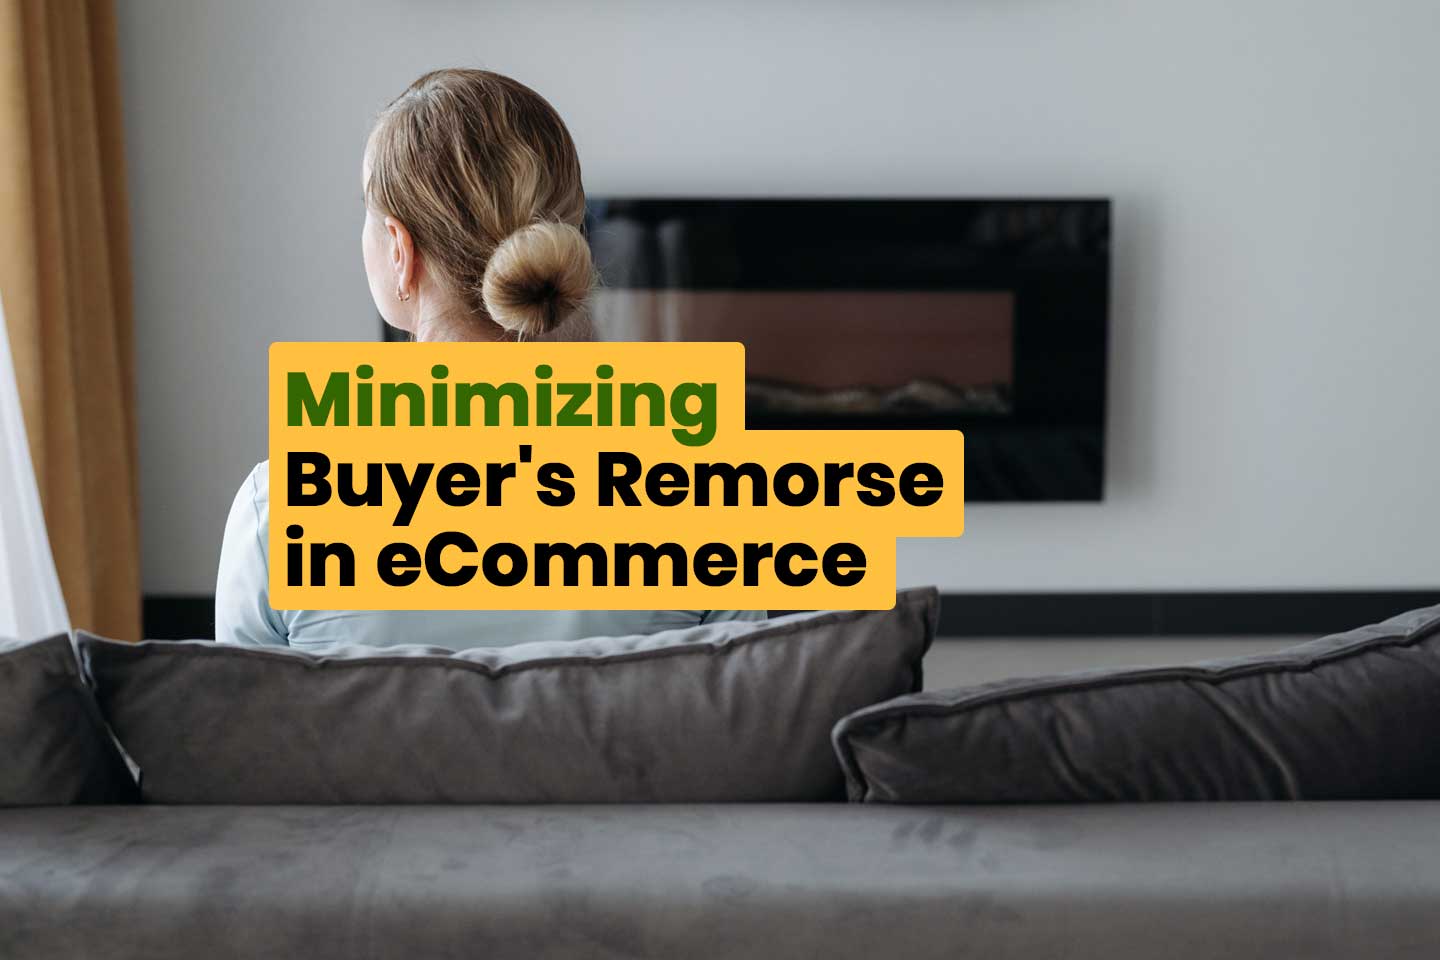 Manage buyer's remorse in ecommerce